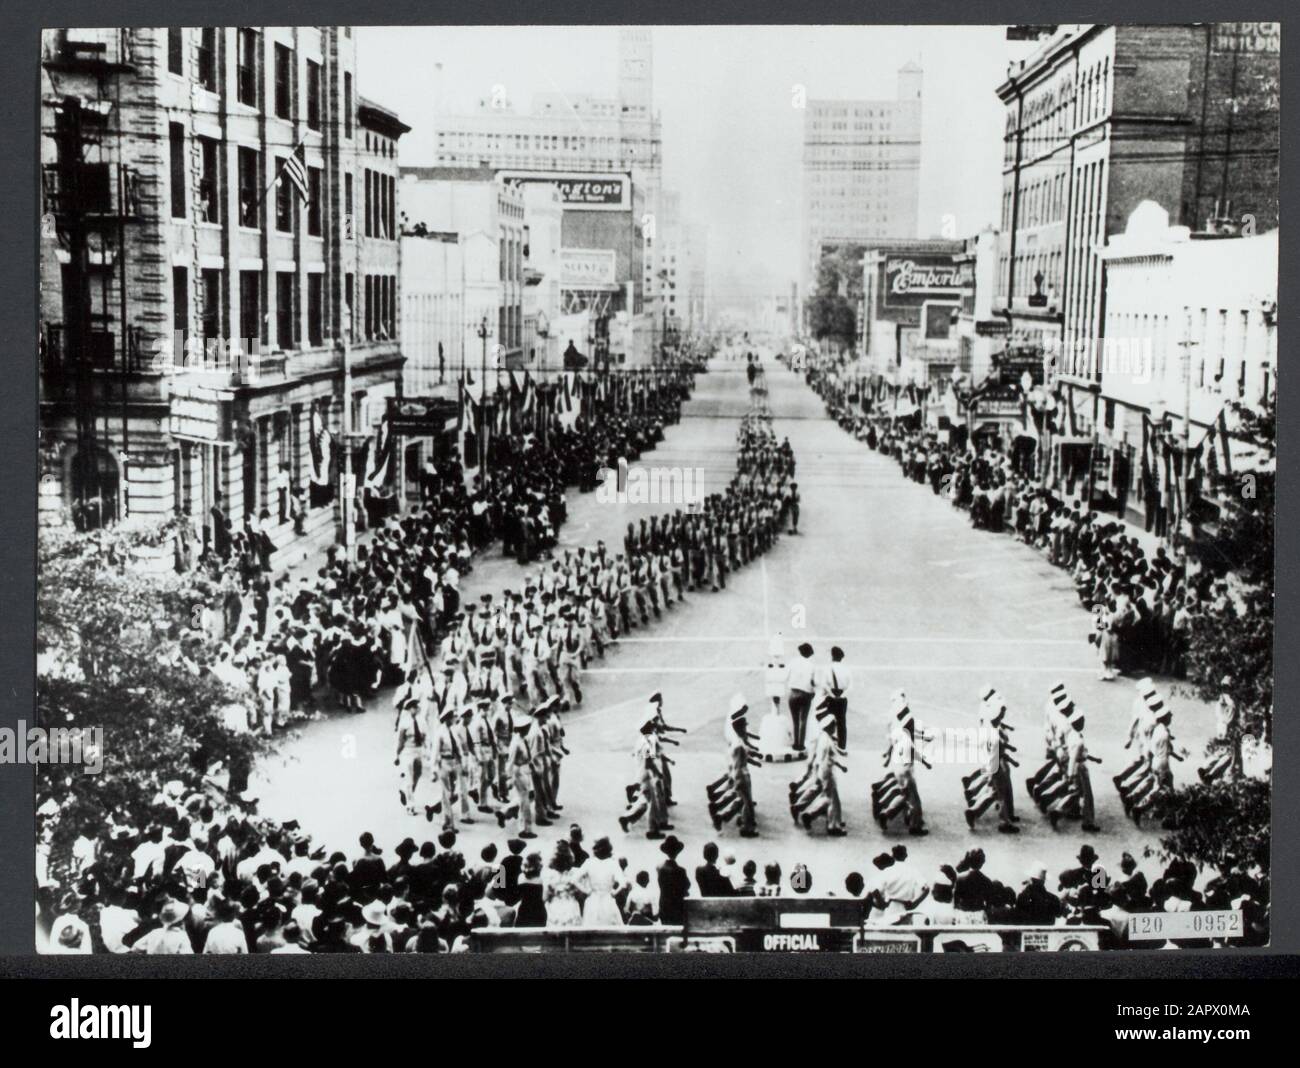 Parade of Dutch soldiers by Melbourne Date: undated Location: Australia, Melbourne Keywords: military, parades, World War II Stock Photo